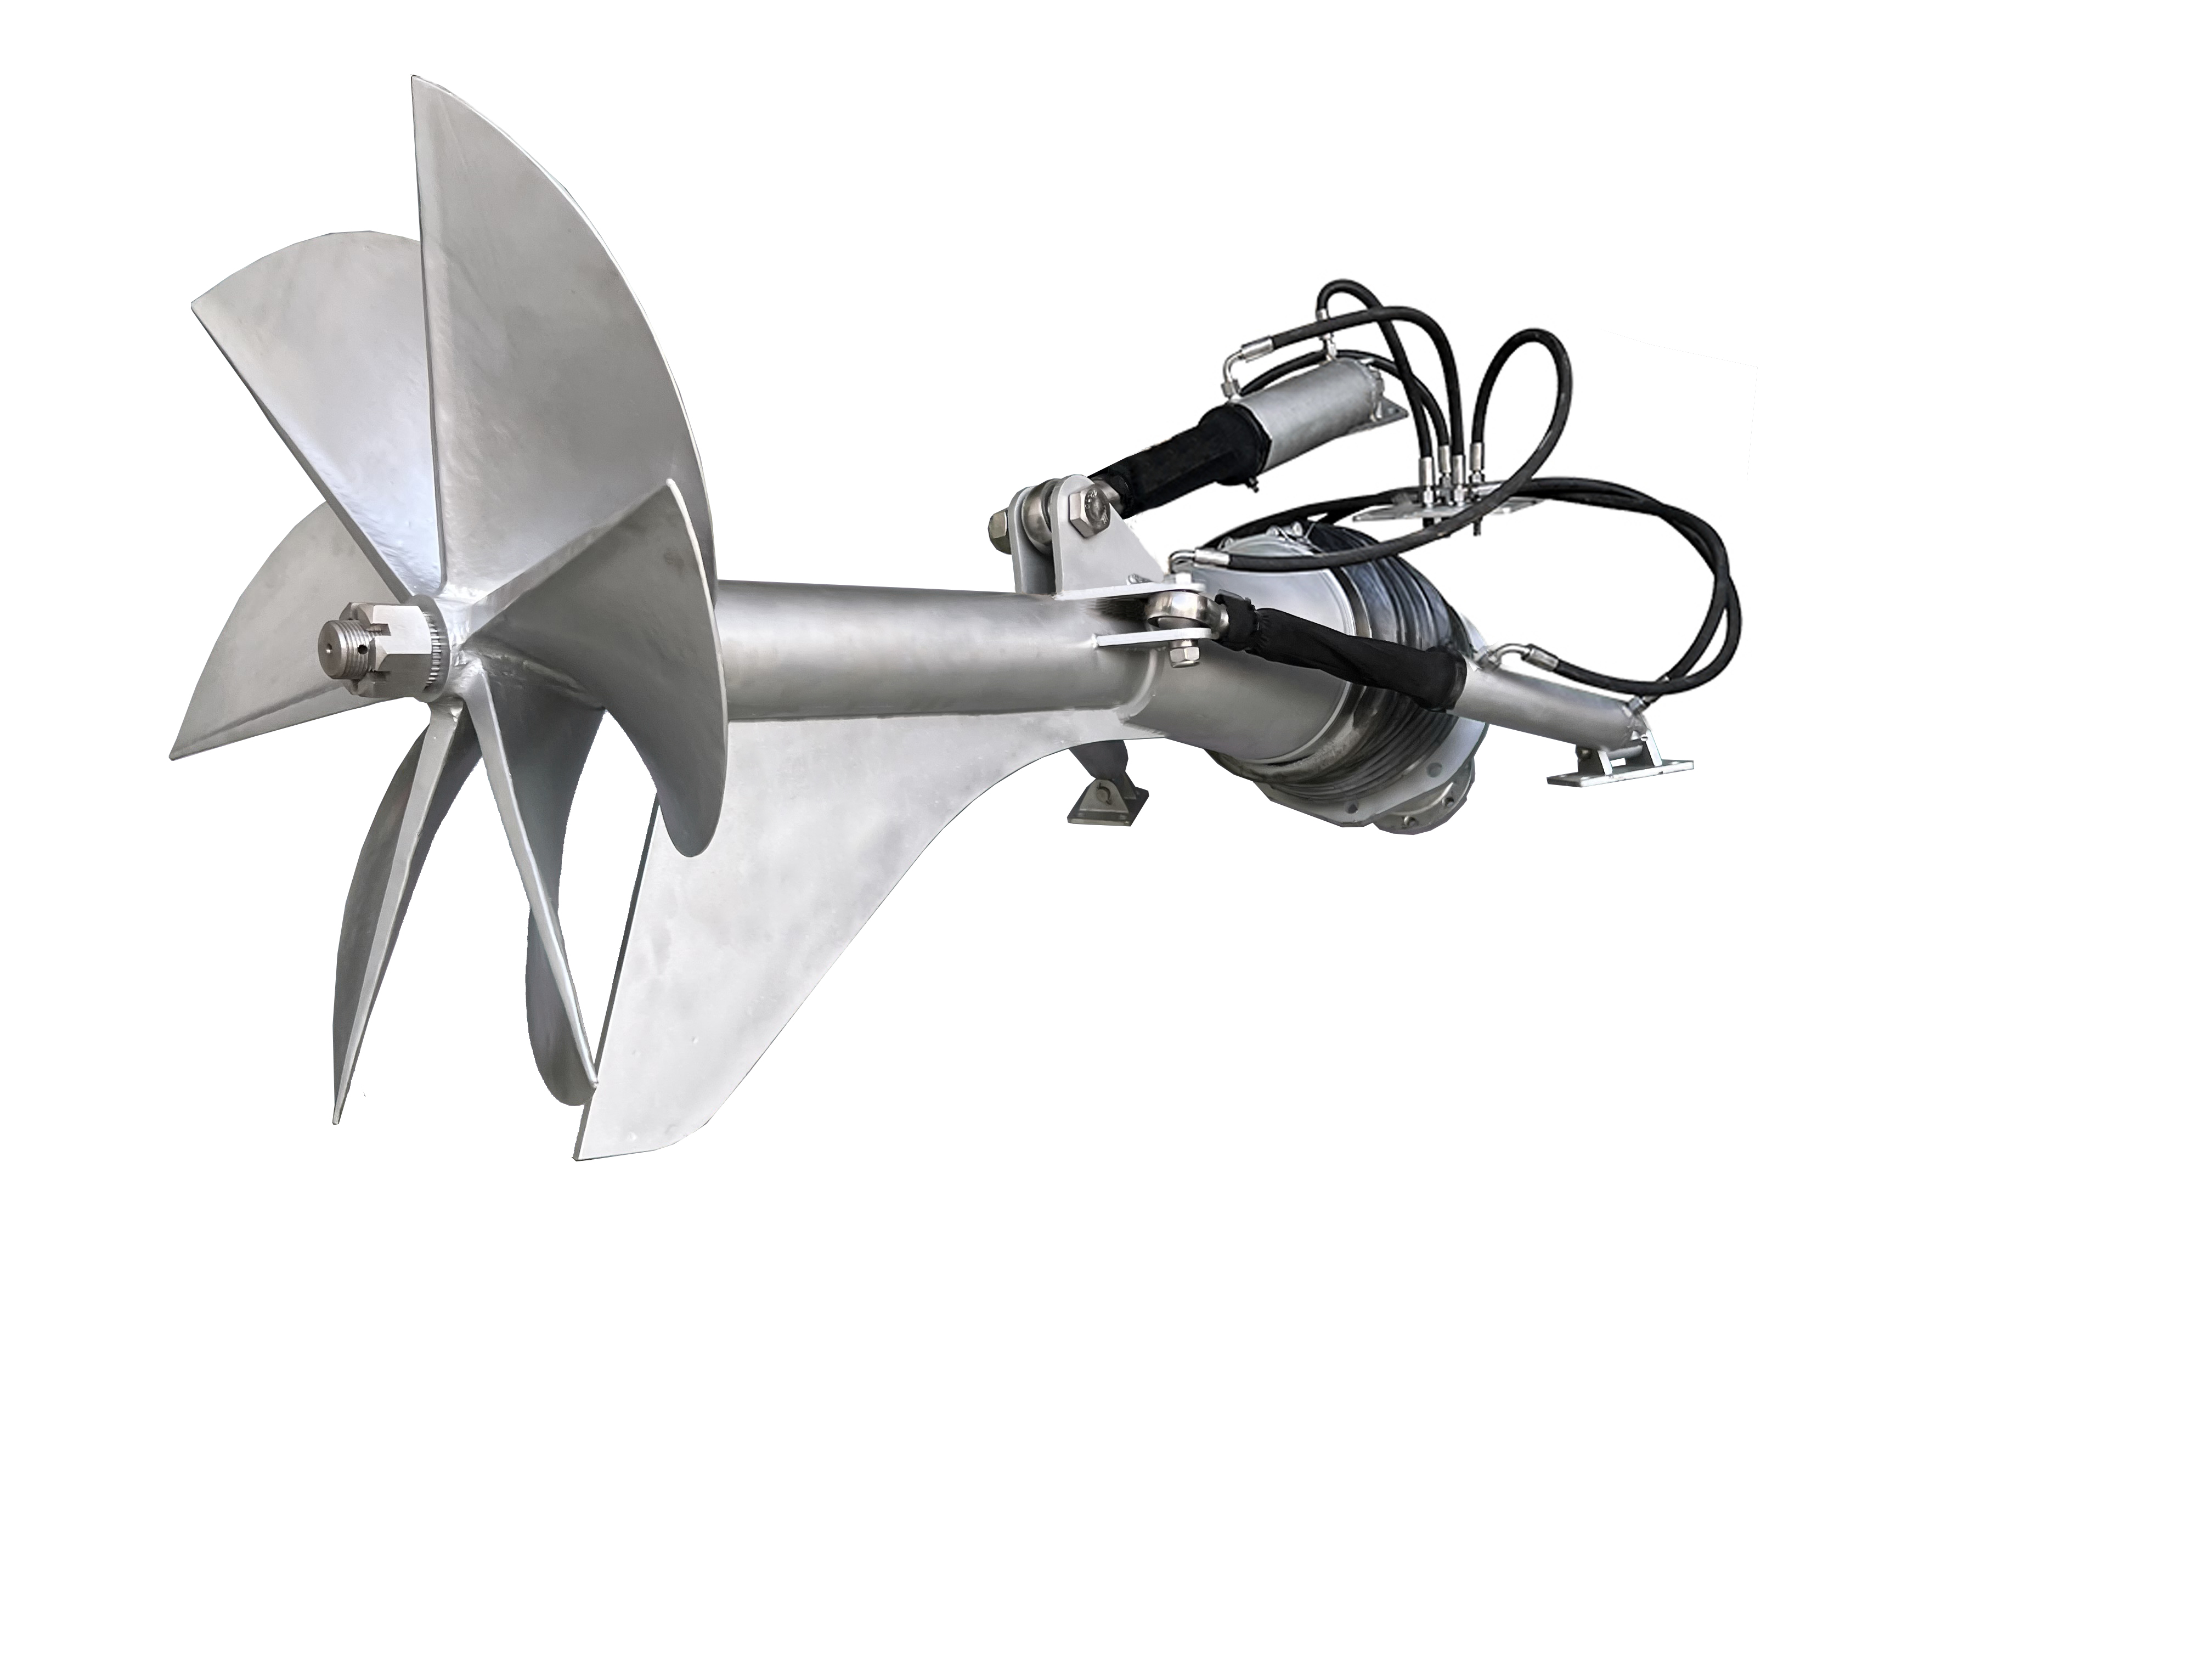 BH660 400Horsepower High Quality Surface Drive Stainless Steel Surface Drive Superior Boat Thruster